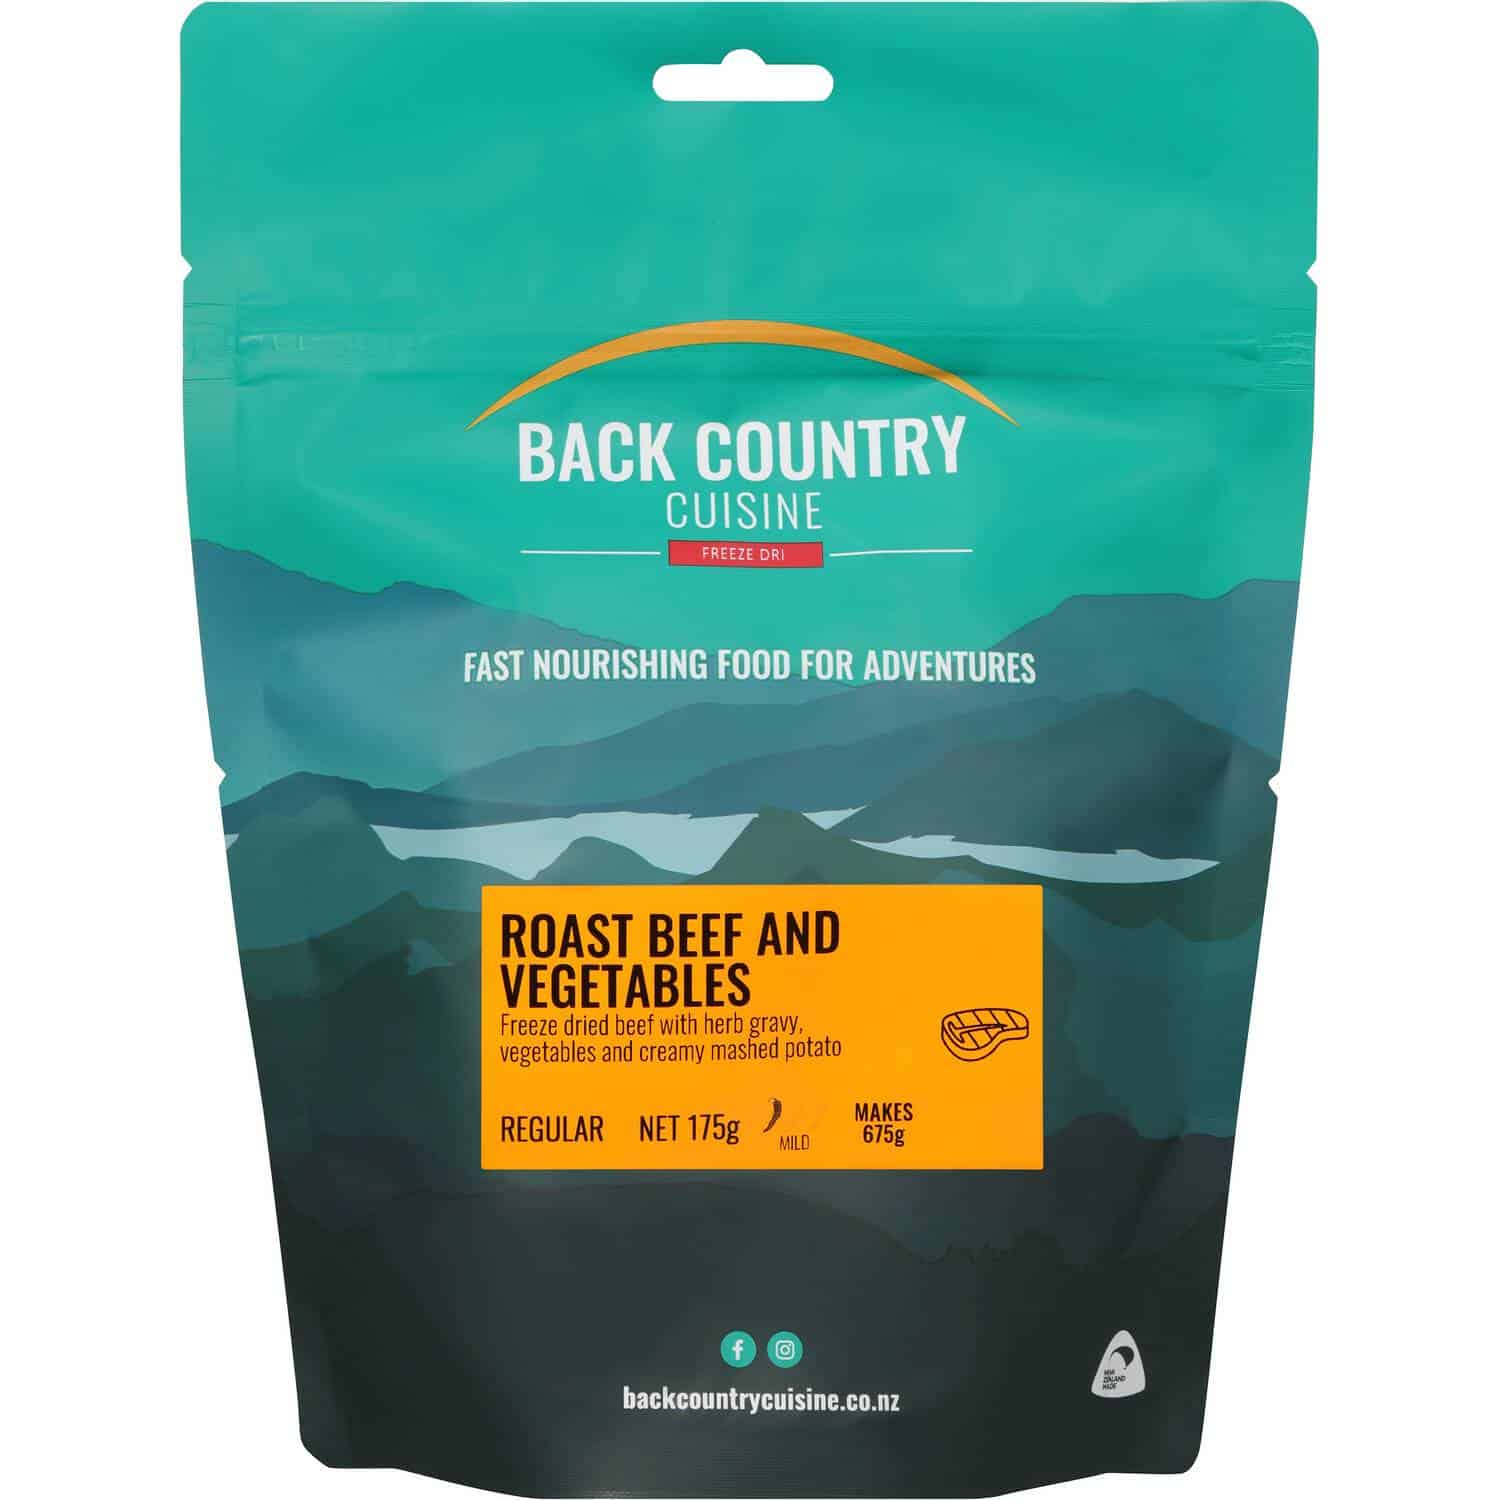 Back Country Cuisine Roast Beef & Vegetables Regular - Tramping Food and Accessories sold by Venture Outdoors NZ